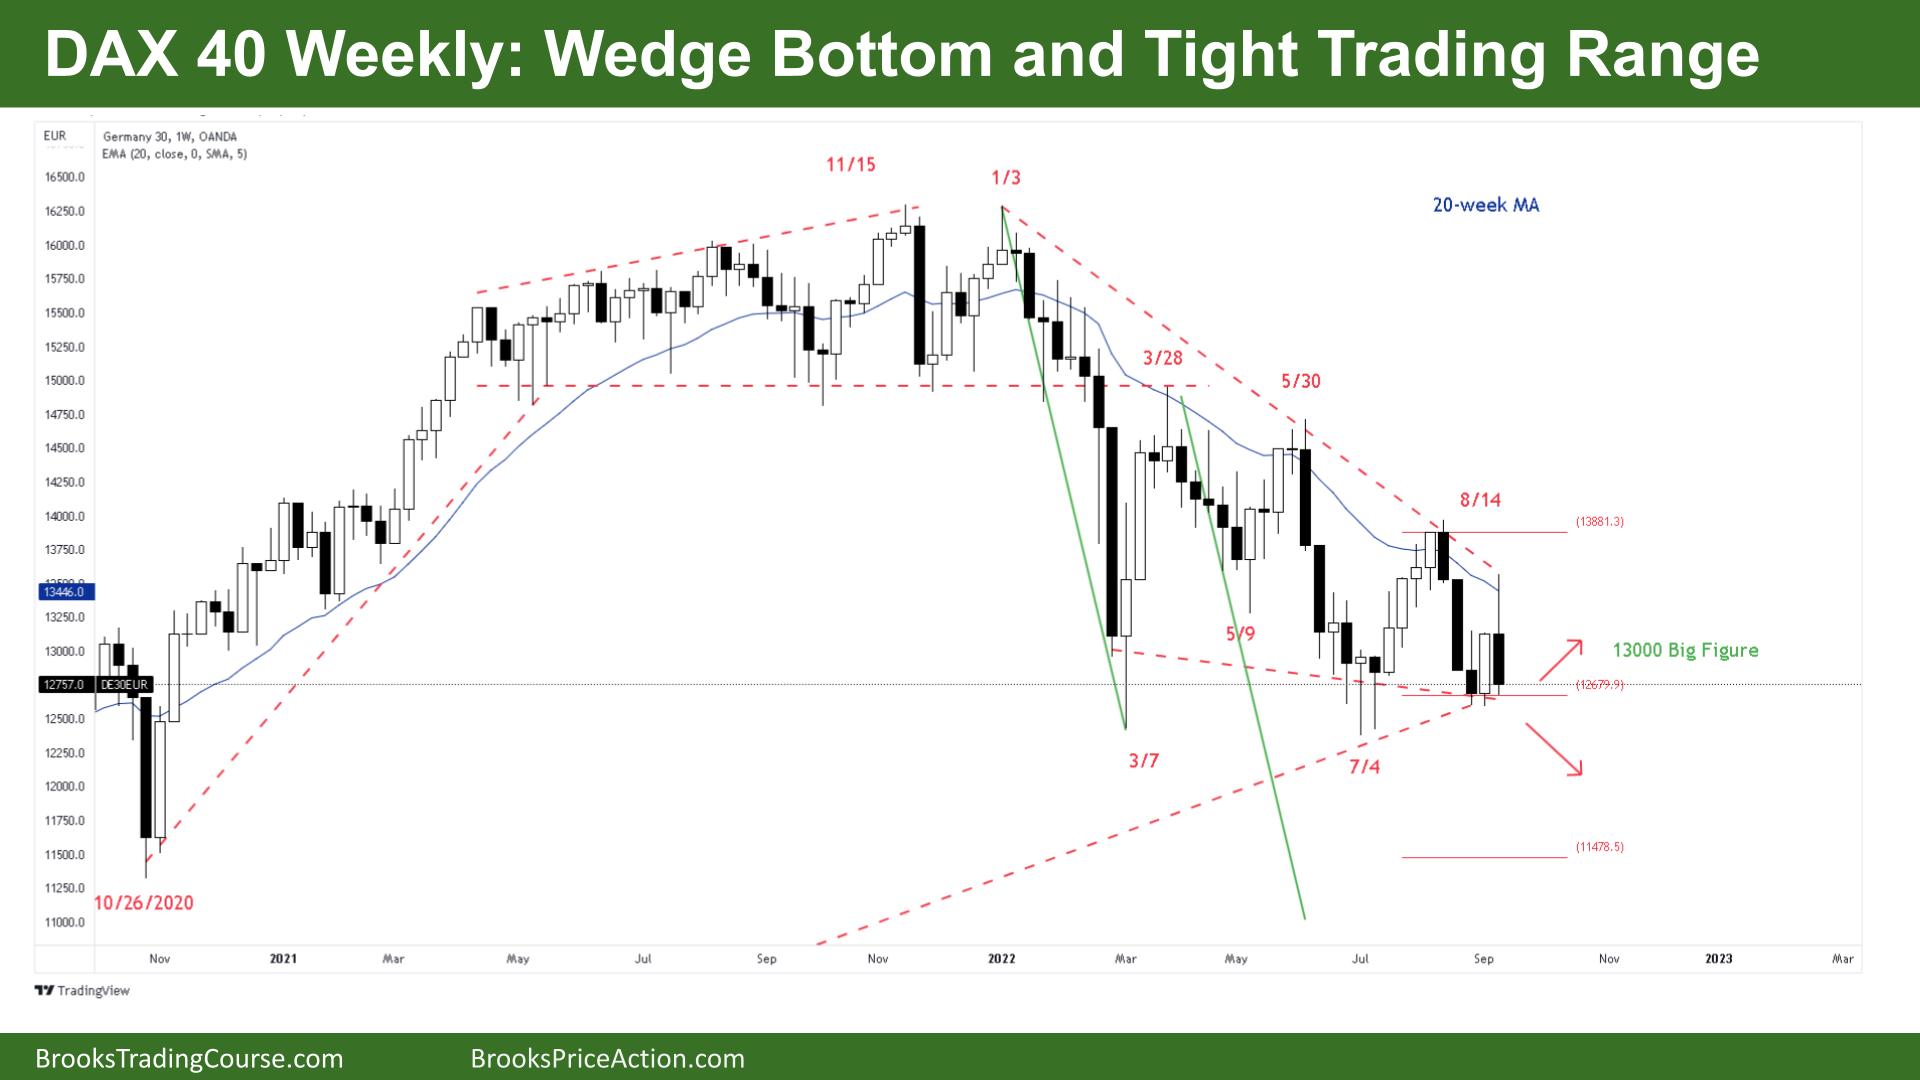 DAX 40 Wedge Bottom and Tight Trading Range